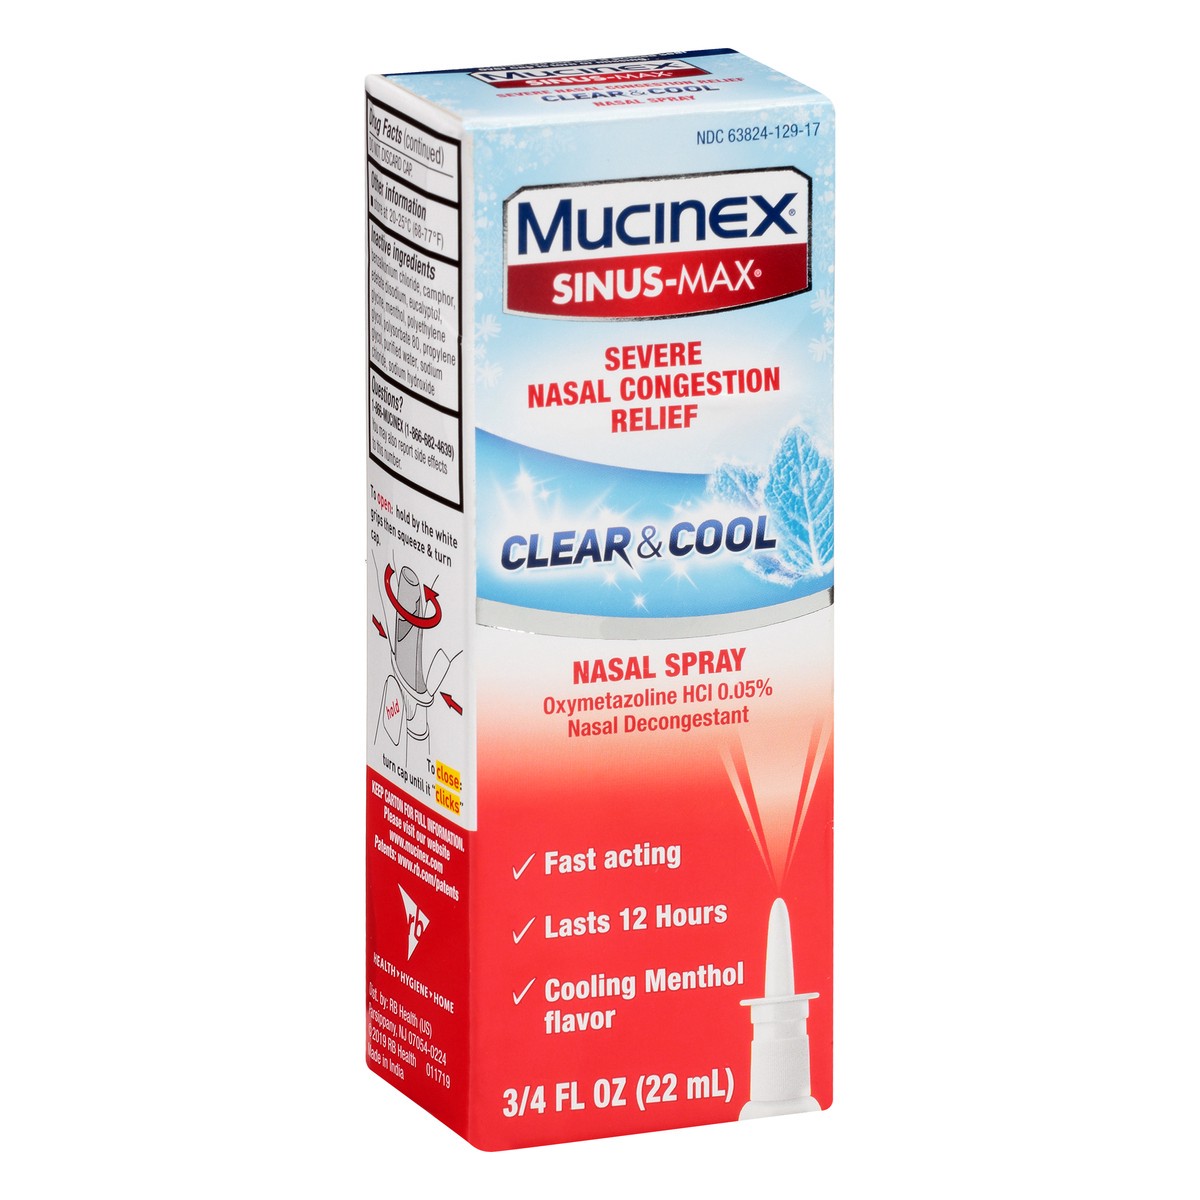 slide 2 of 9, Mucinex Sinus-Max Severe Nasal Congestion Relief Clear & Cool Nasal Spray, 0.75 fl. oz., Lasts 12 Hours, Fast Acting, Cooling Menthol Flavor, 0.75 fl oz